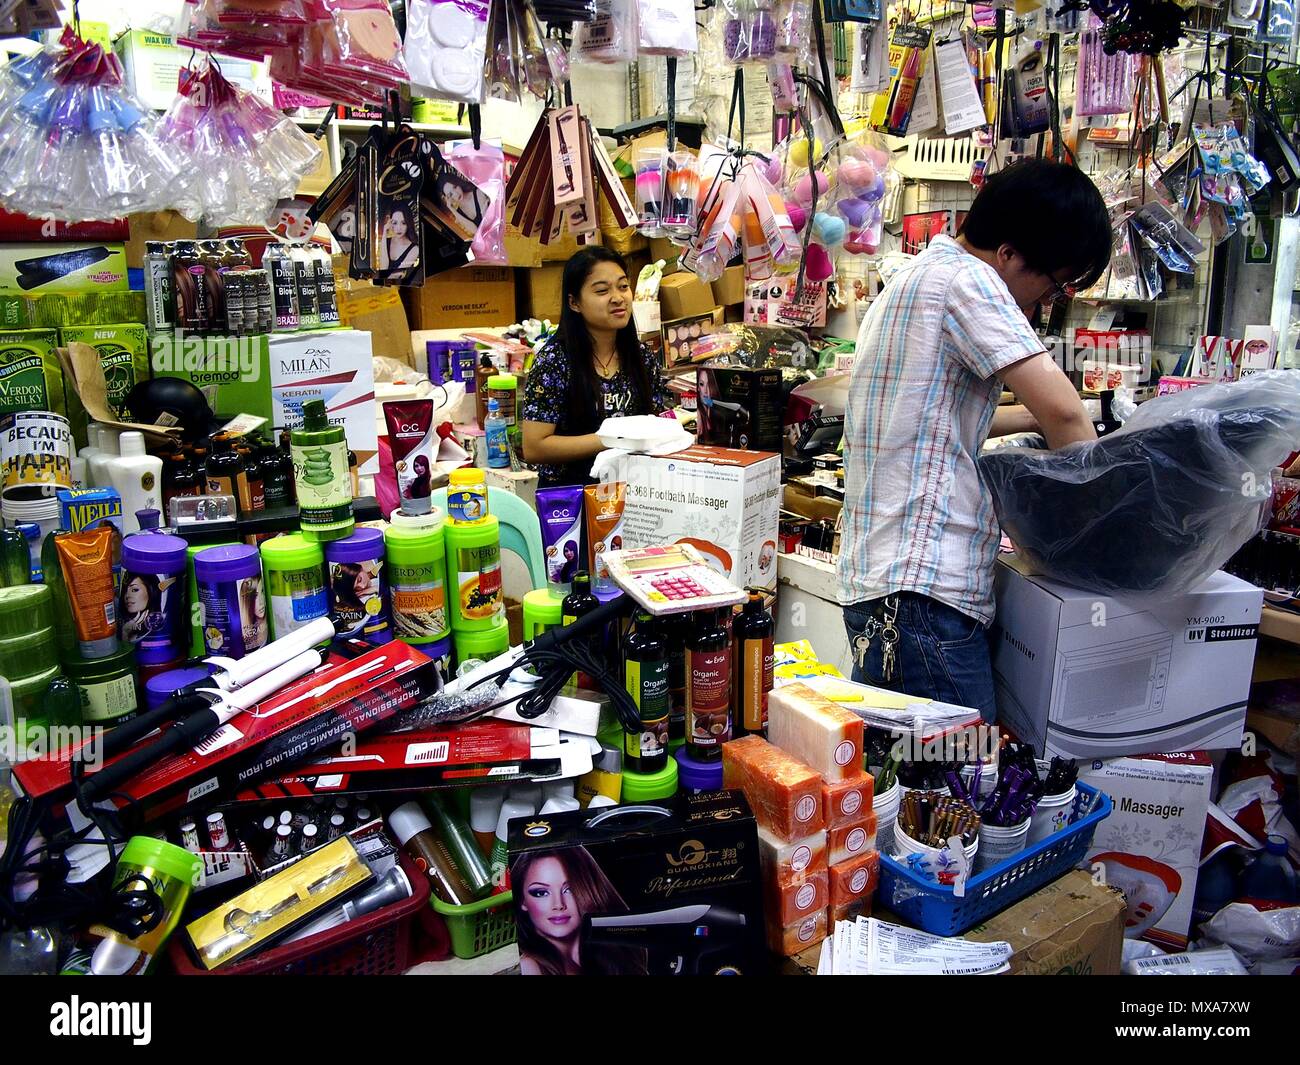 DIVISORIA, MANILA CITY, PHILIPPINES - MAY 14, 2018: Assorted salon supplies on display at a bazaar stall inside a big shopping mall. Stock Photo